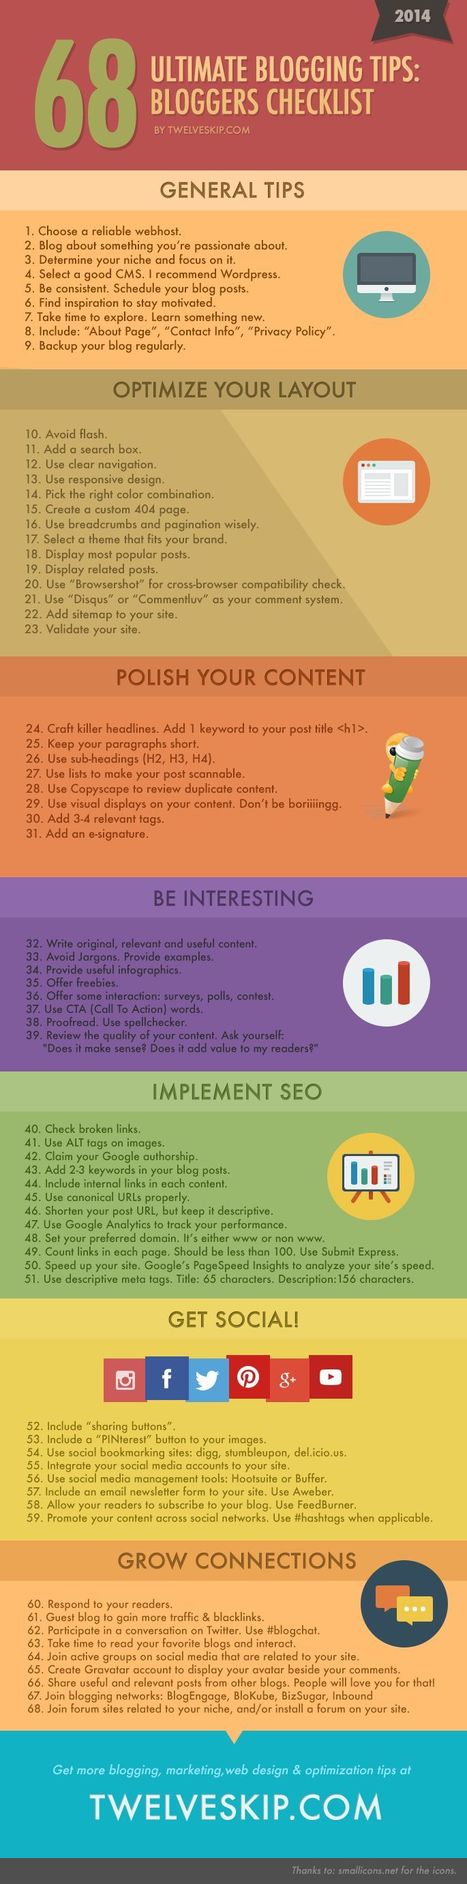 68 Best Blogging Tips: Bloggers Ultimate Checklist 2014 | Infographic | 21st Century Learning and Teaching | Scoop.it